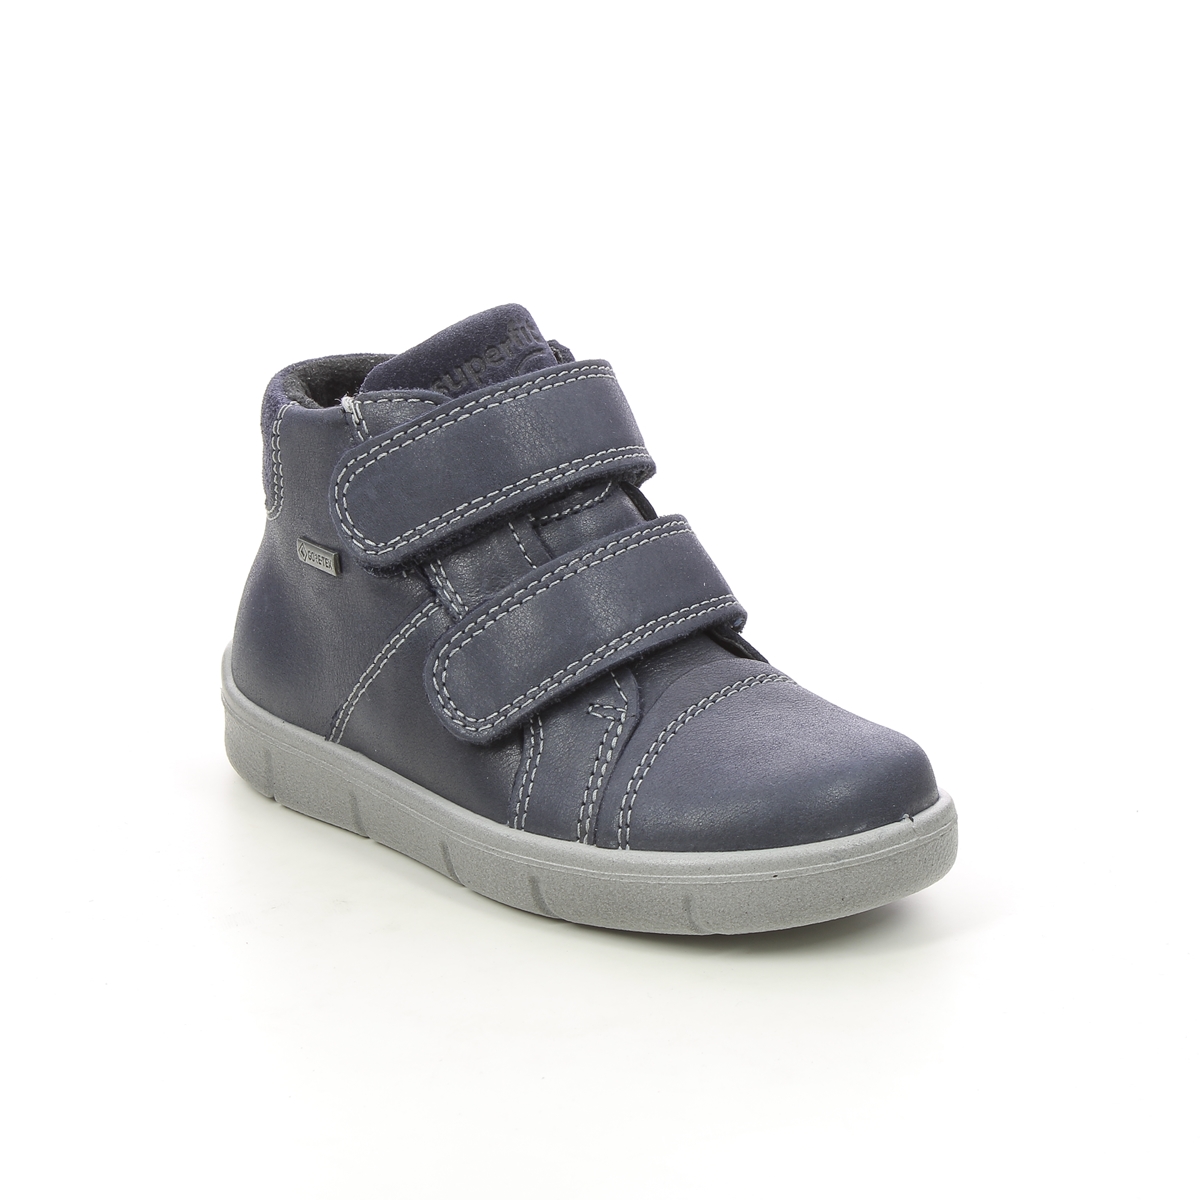 Superfit Ulli 2V Gtx Navy Leather Kids Toddler Boys Boots 0800423-8000 In Size 22 In Plain Navy Leather